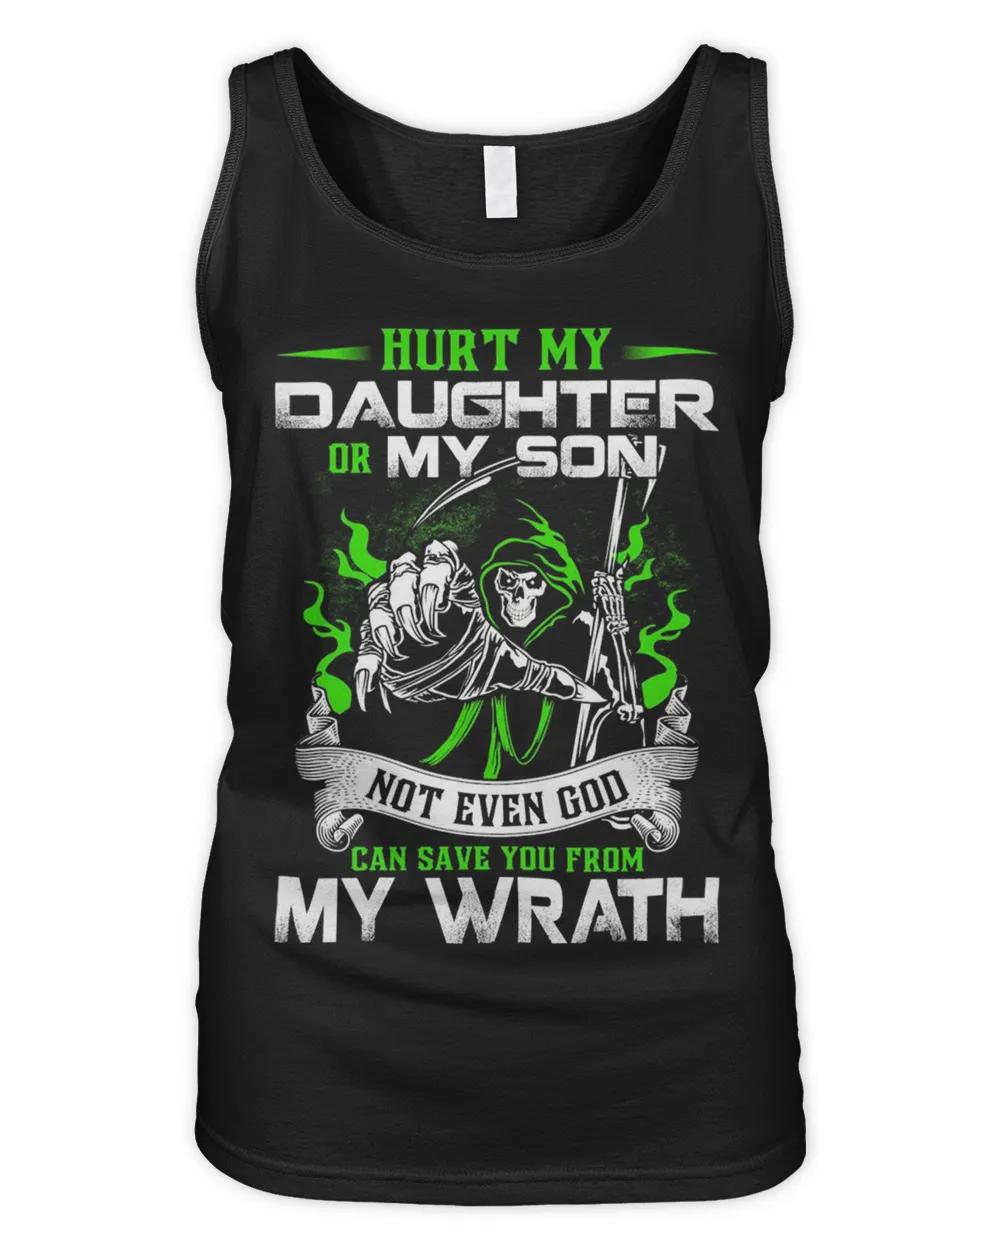 Hurt My Daughter Or My Son Not Even God Can Save You From My Wrath Shirt